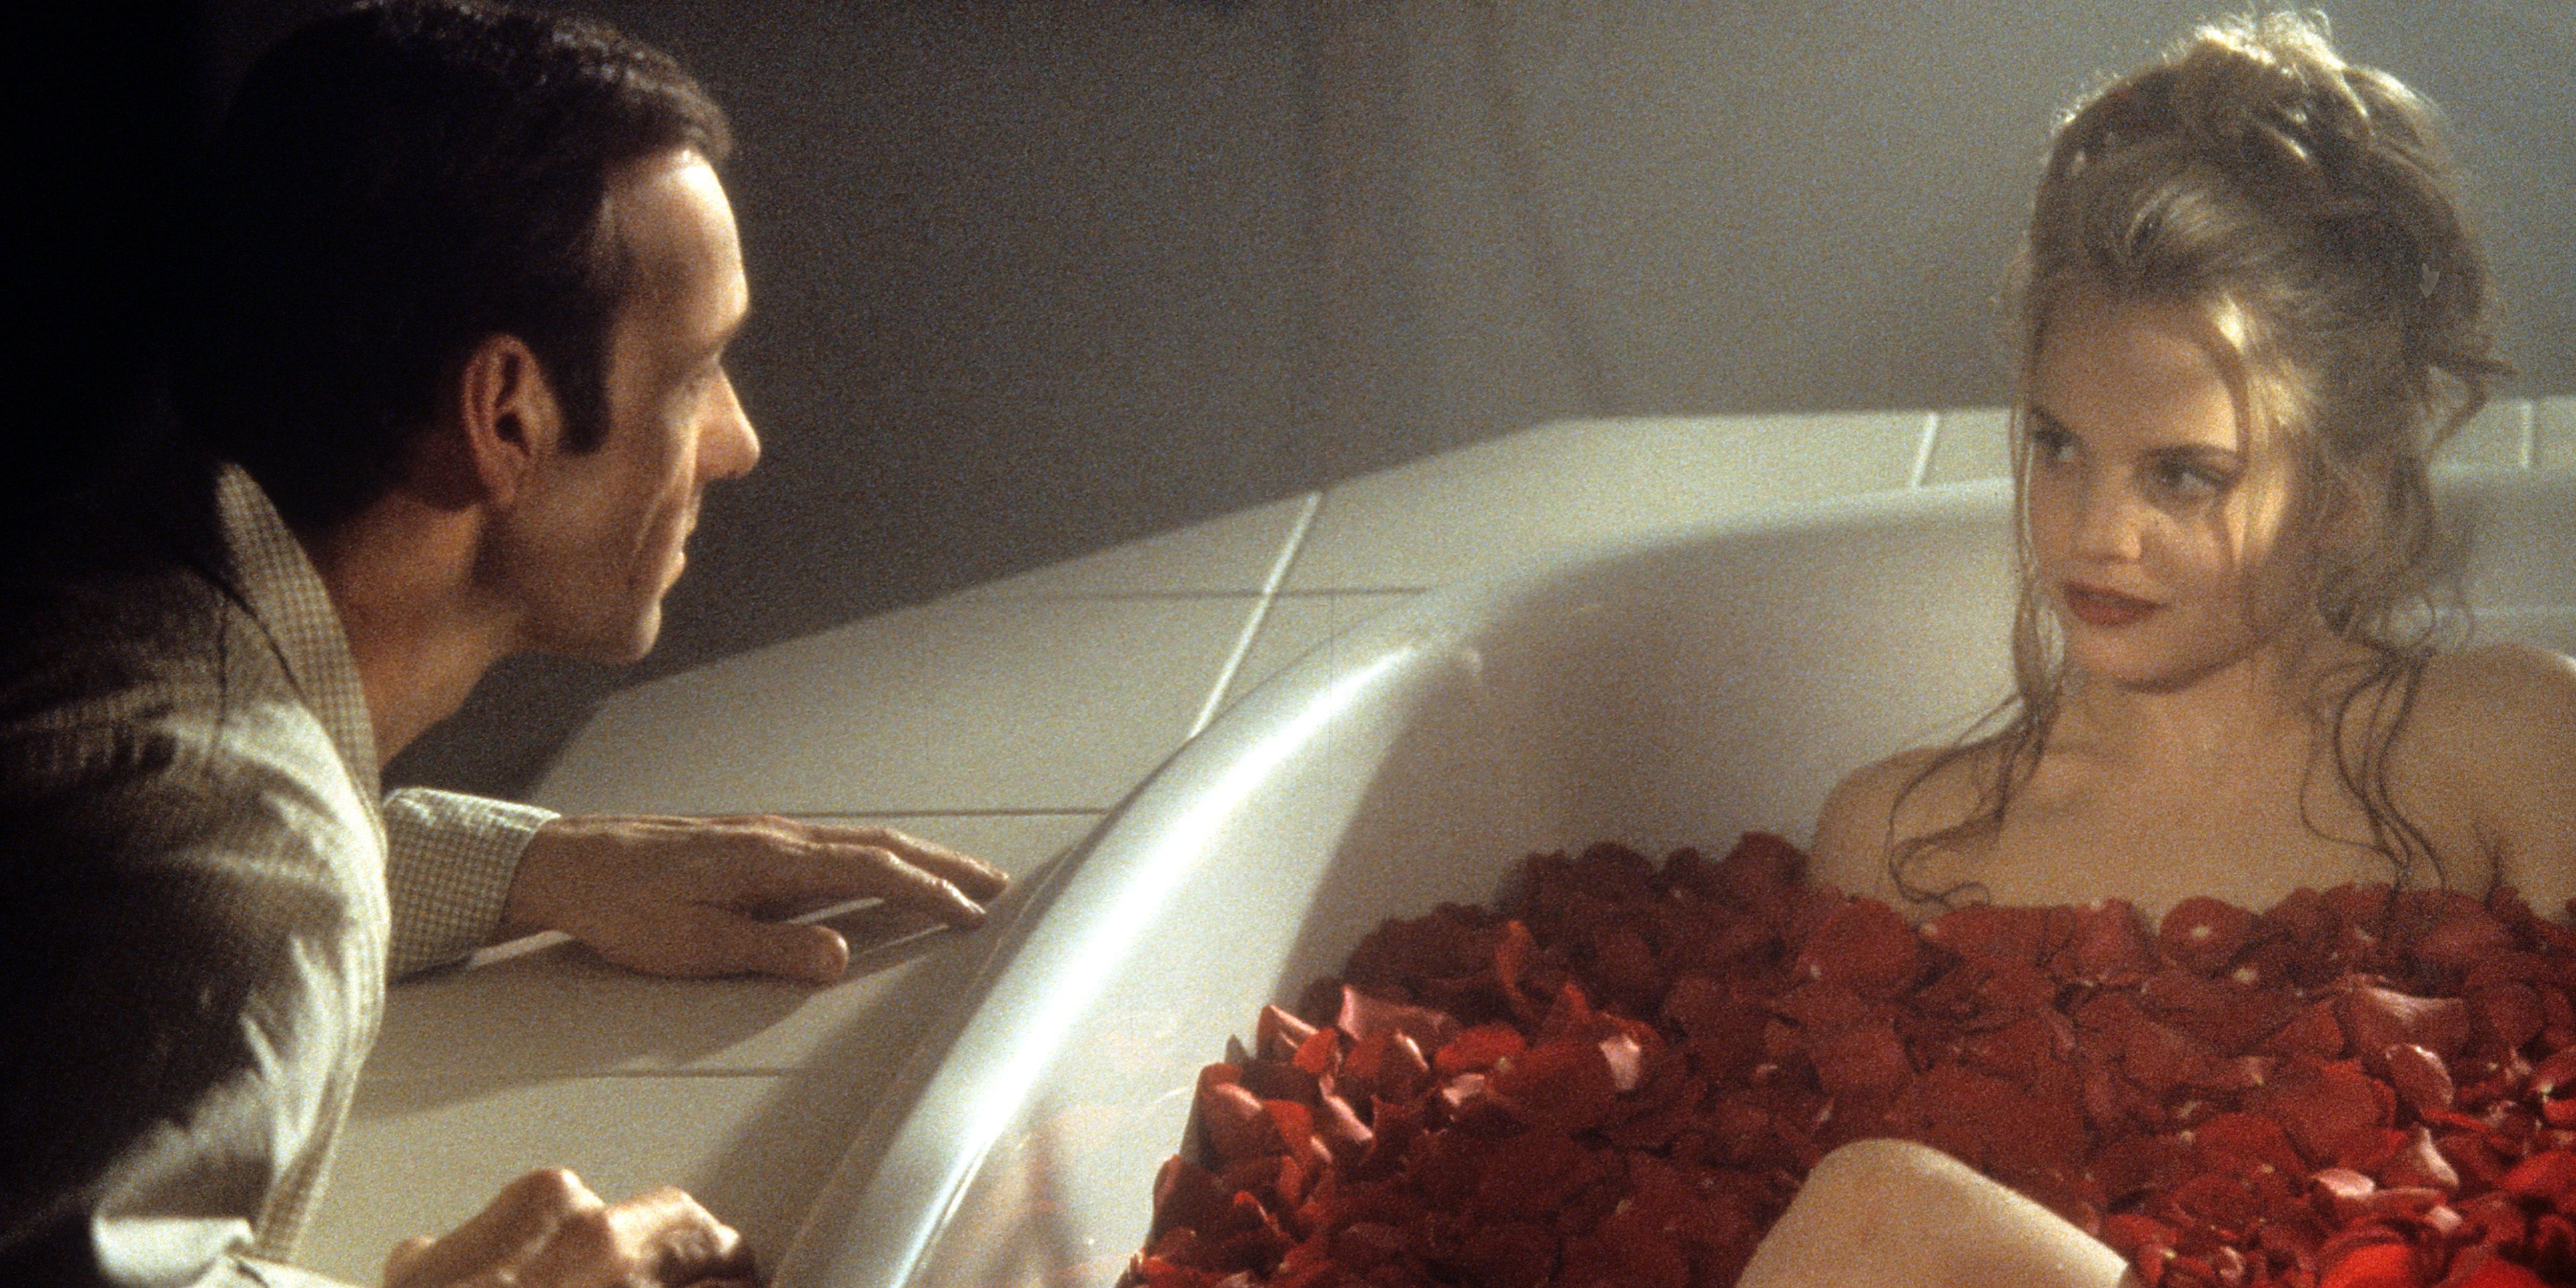 Kevin Spacey talks to a woman in a bathtub filled with roses in American Beauty